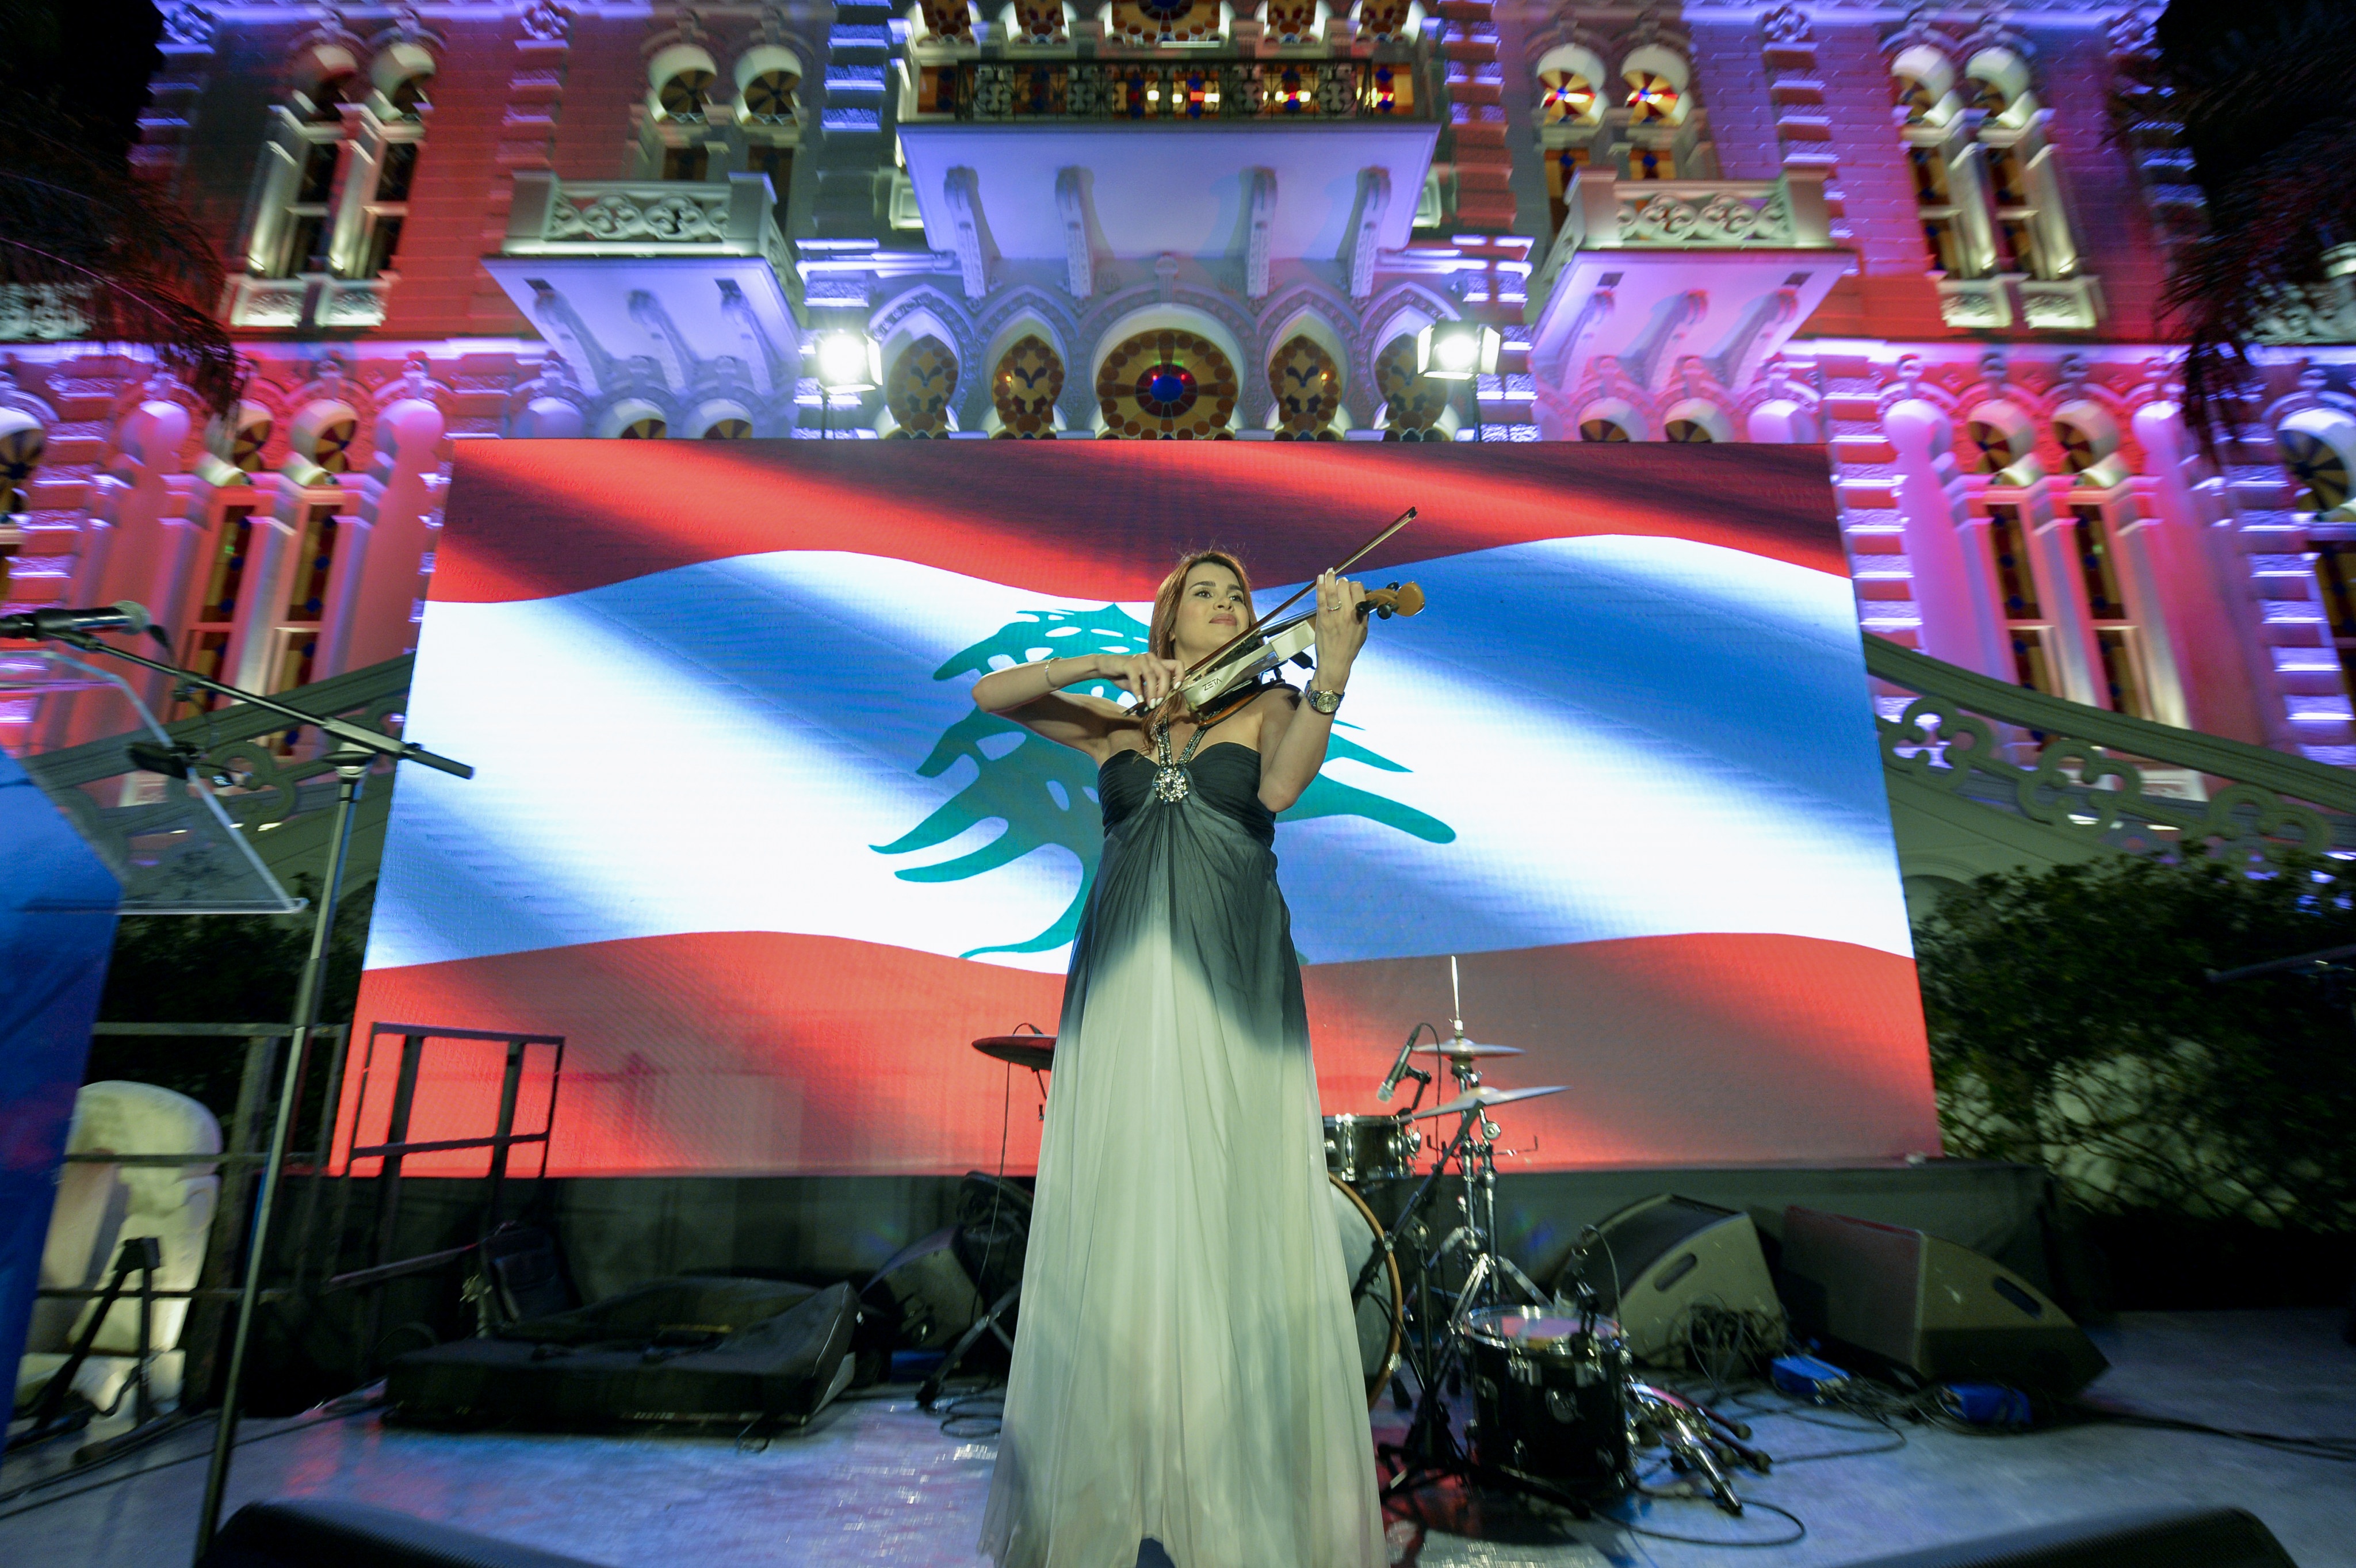 A woman in an elegant gown plays the violin on stage, with the Lebanese flag displayed on a screen behind her and an illuminated building as the backdrop.